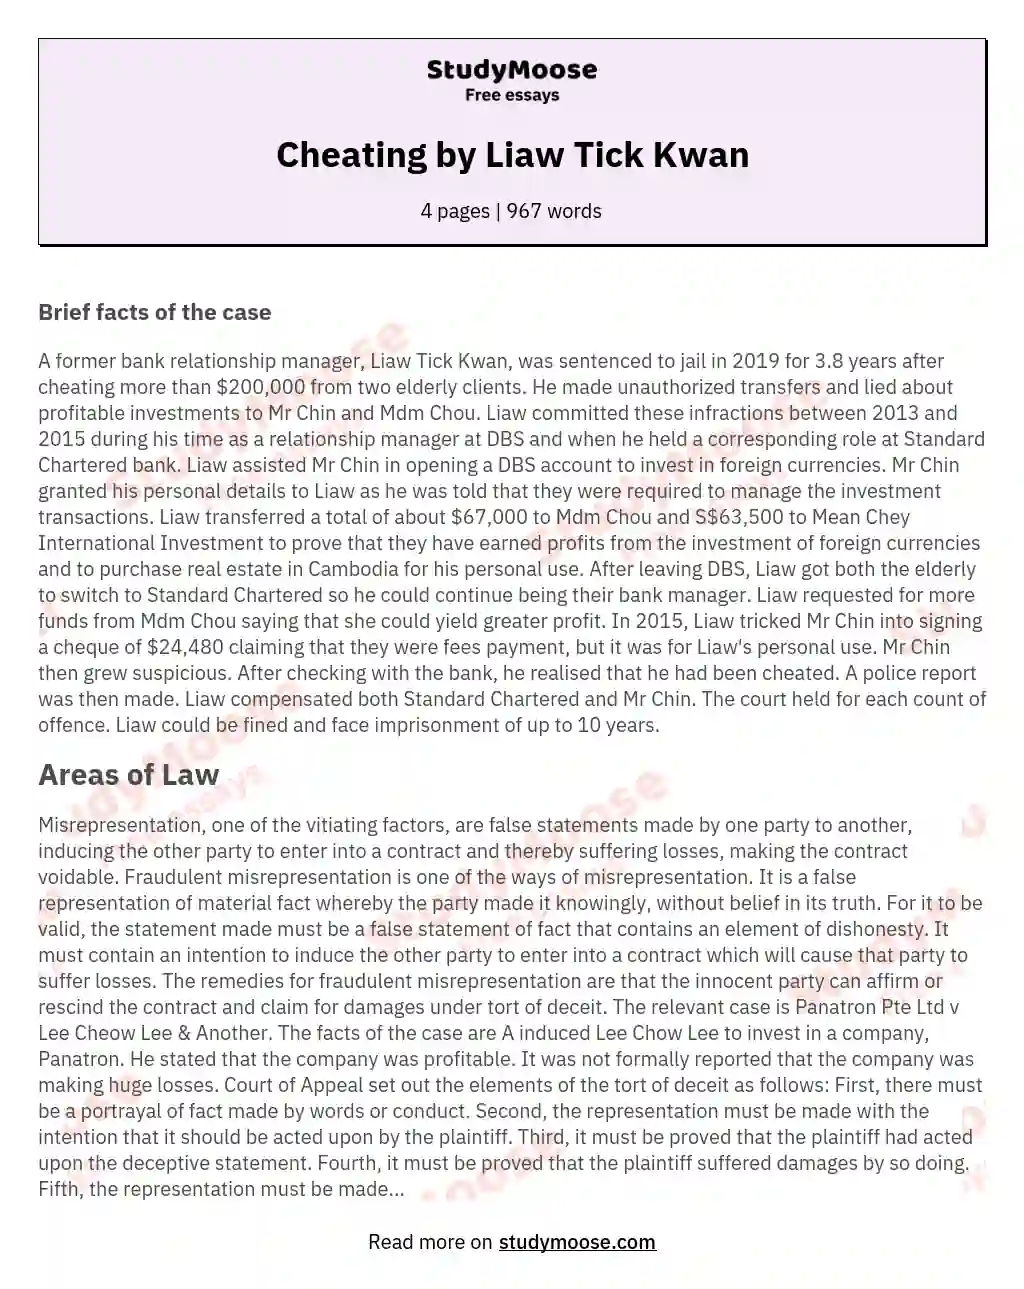 Cheating by Liaw Tick Kwan